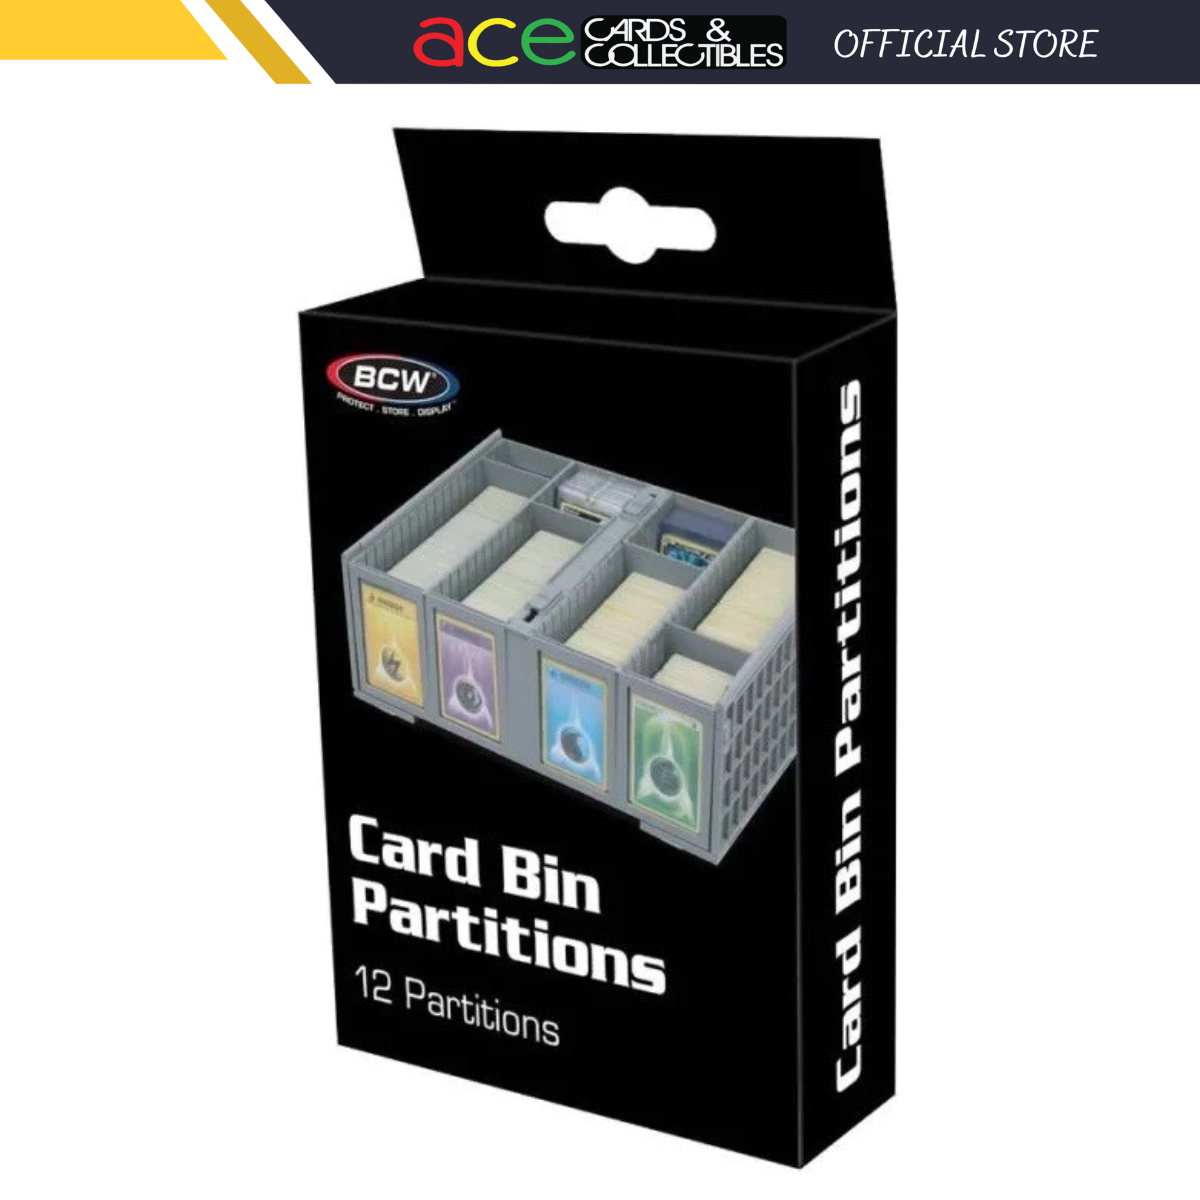 BCW Collectible Card Bin Partitions &quot;Grey&quot;-BCW Supplies-Ace Cards &amp; Collectibles